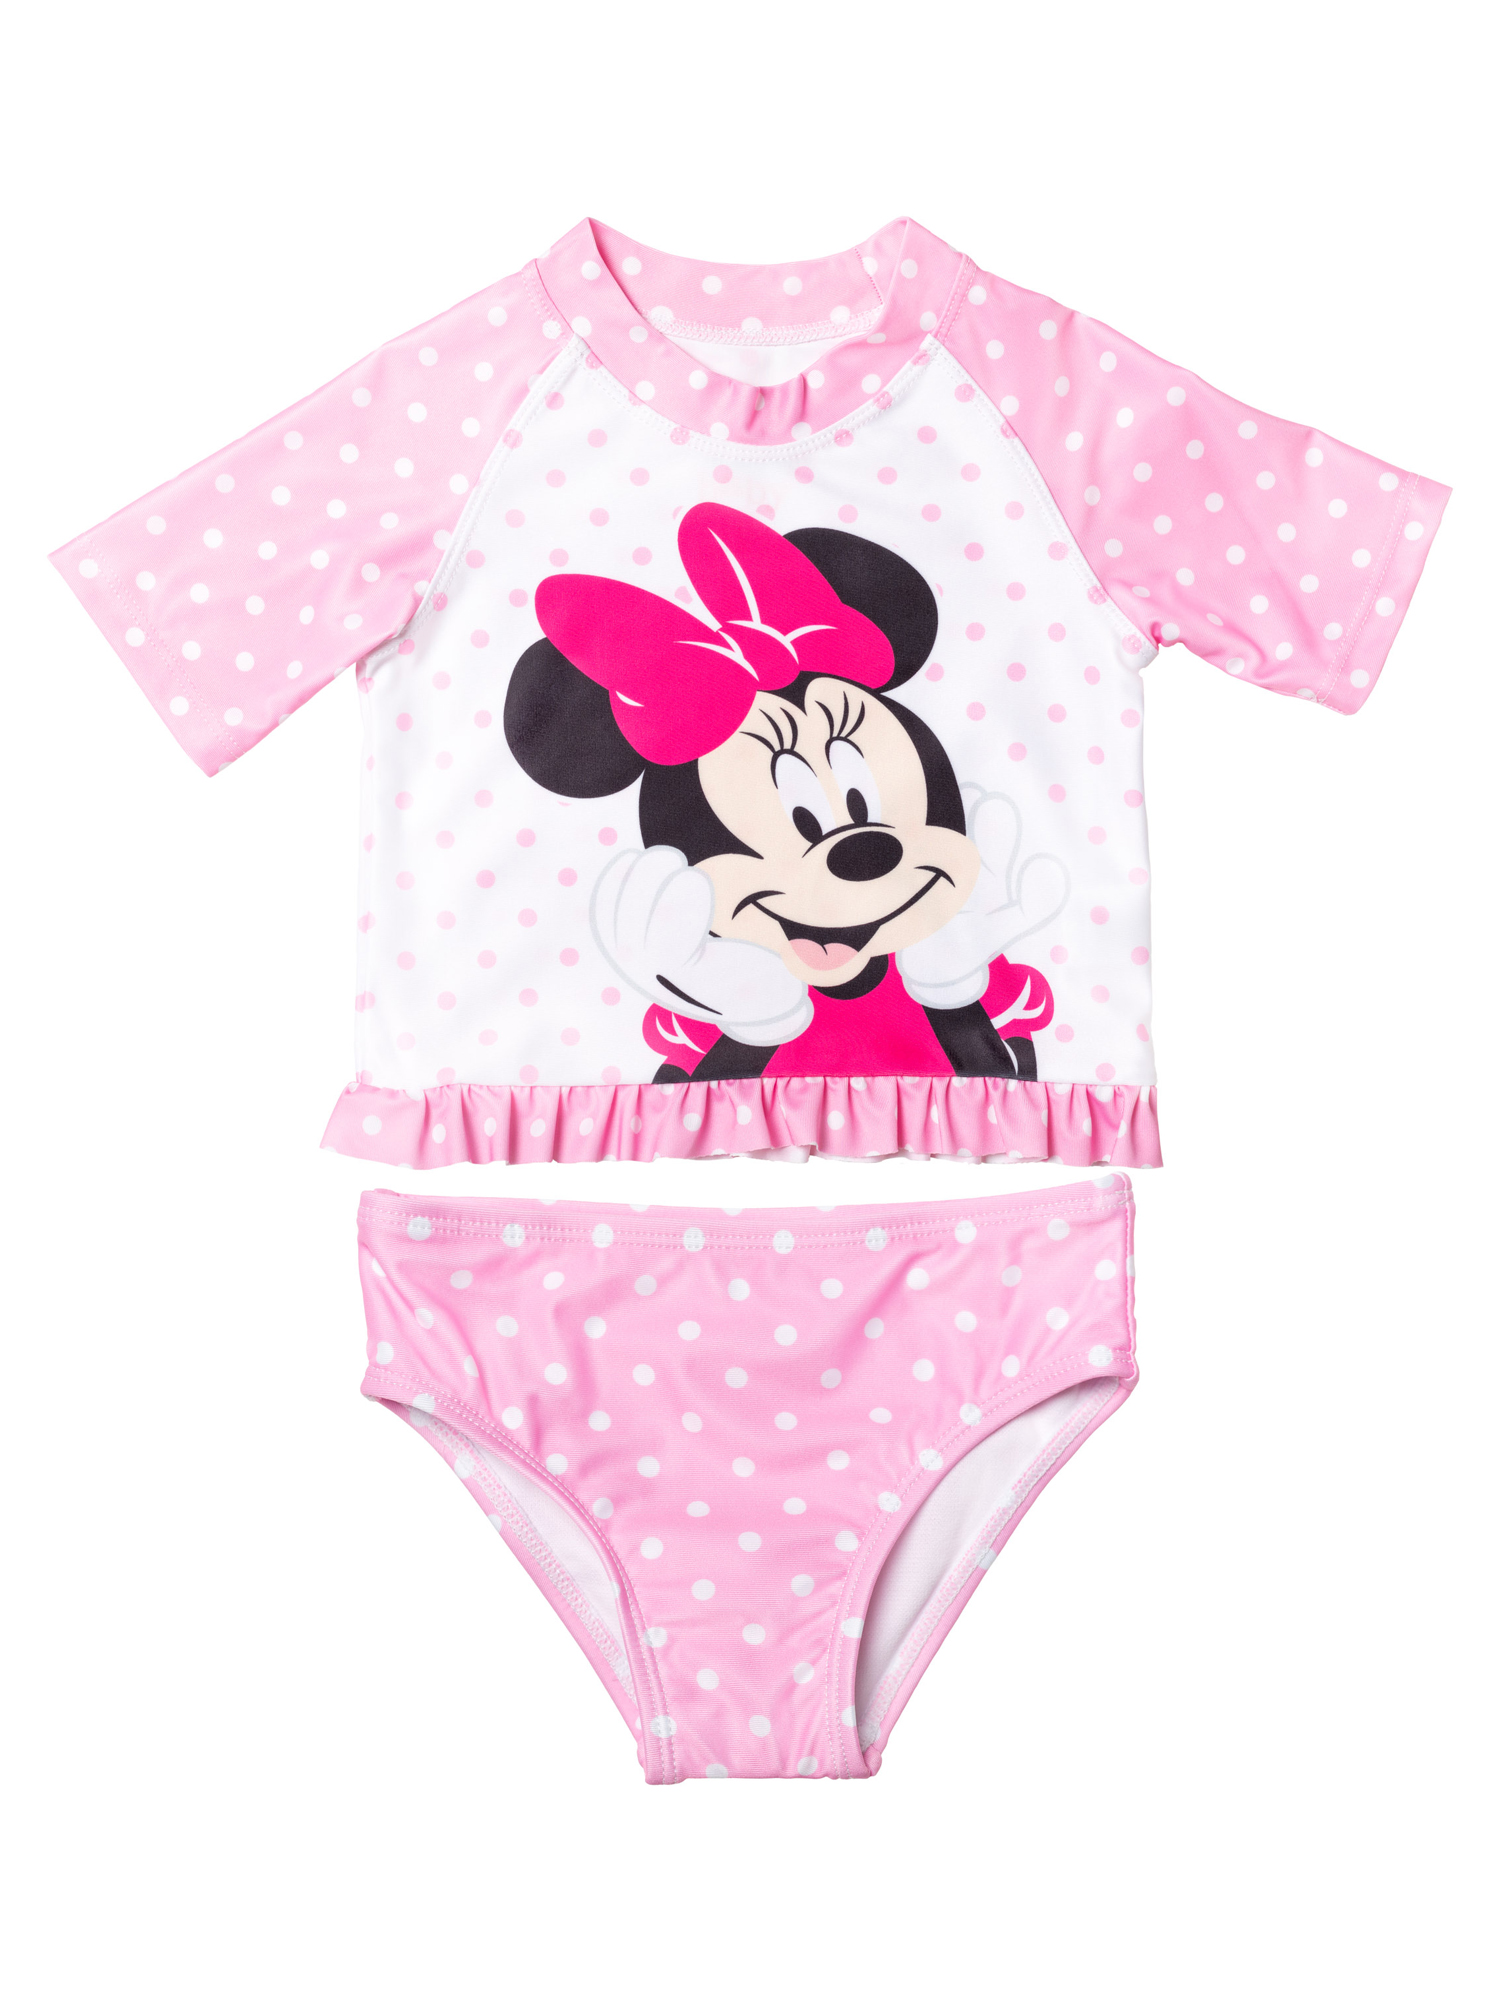 Disney Minnie Mouse Rash Guard Swimsuit for Girls Size 12-18 Months